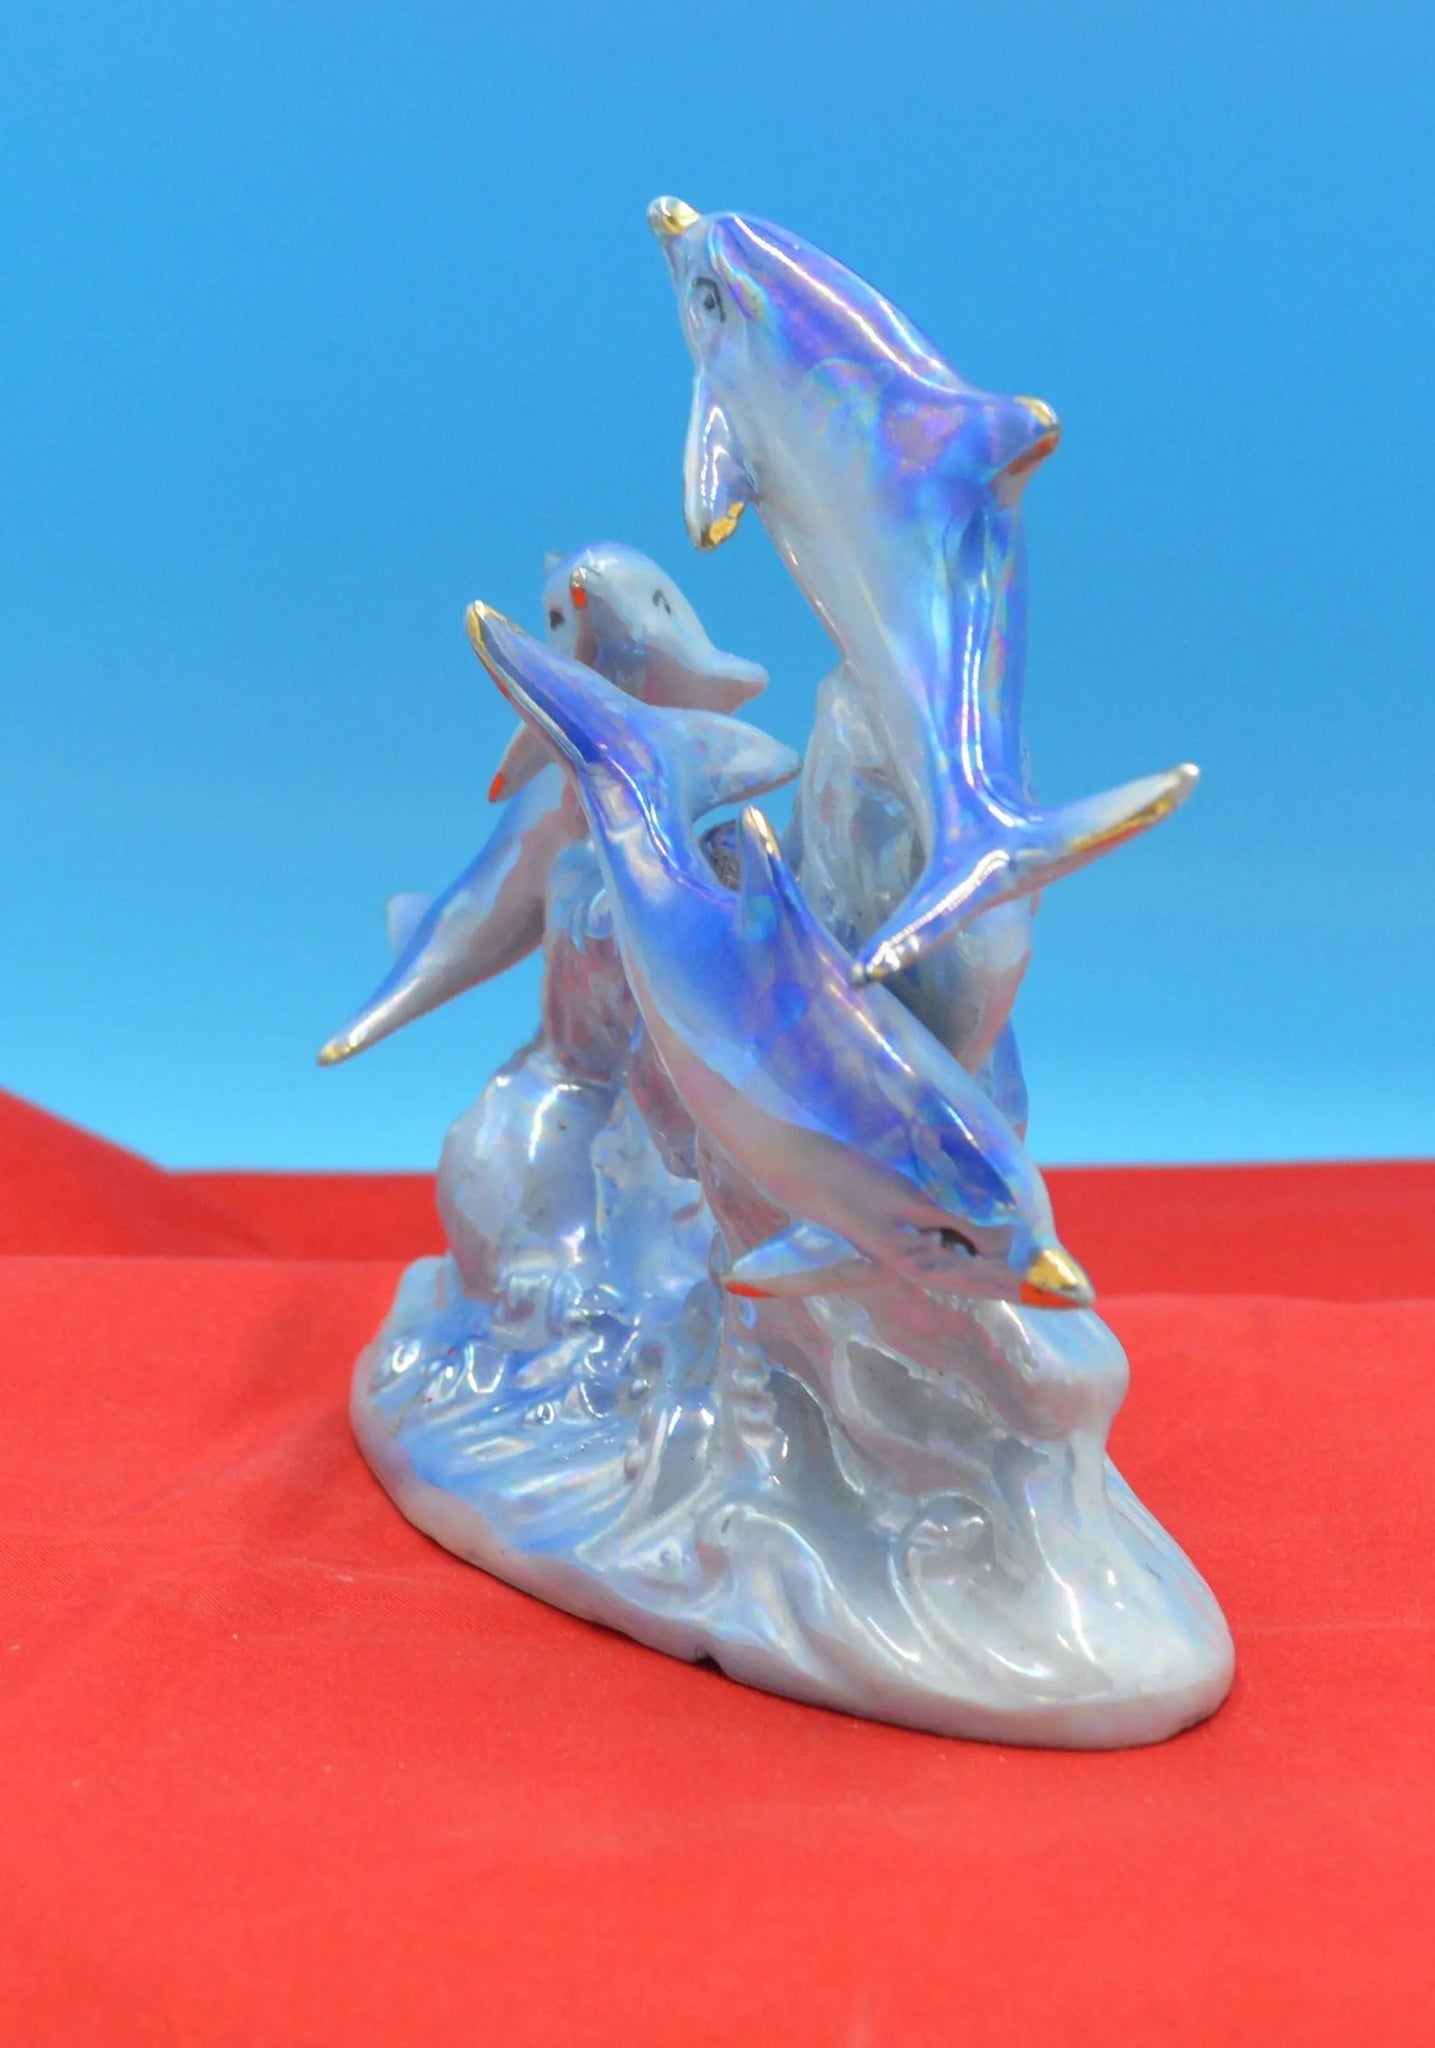 DOLPHIN ORNAMENT THREE IRIDESCENT DOLPHINS - TMD167207